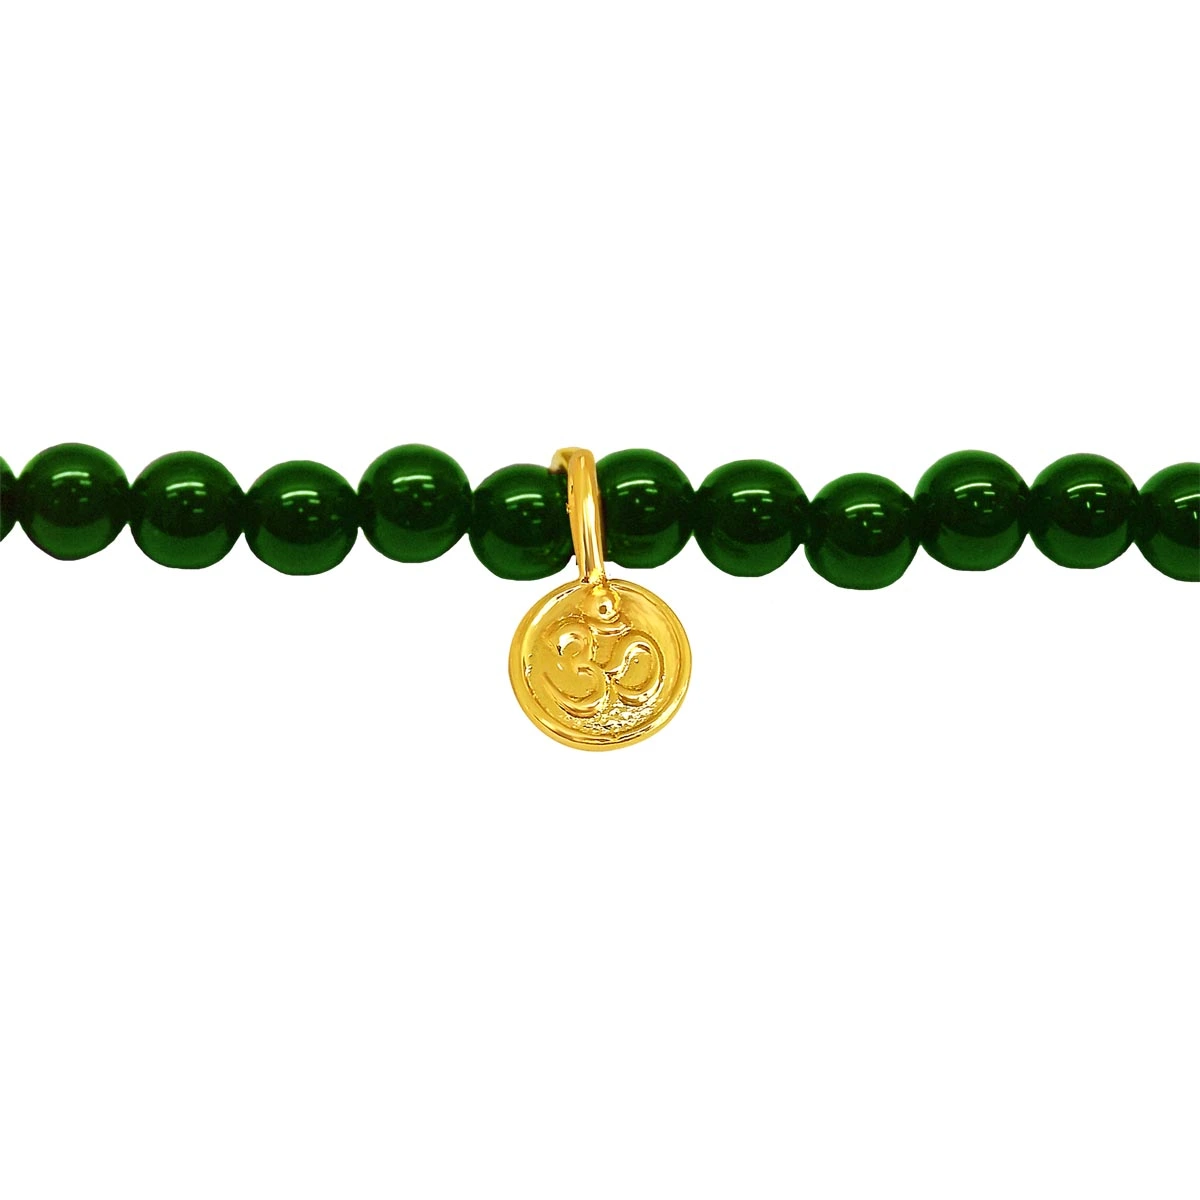 Gold Plated Sterling Silver Aum with Green Onyx Bracelet for Men and Women (SB72)